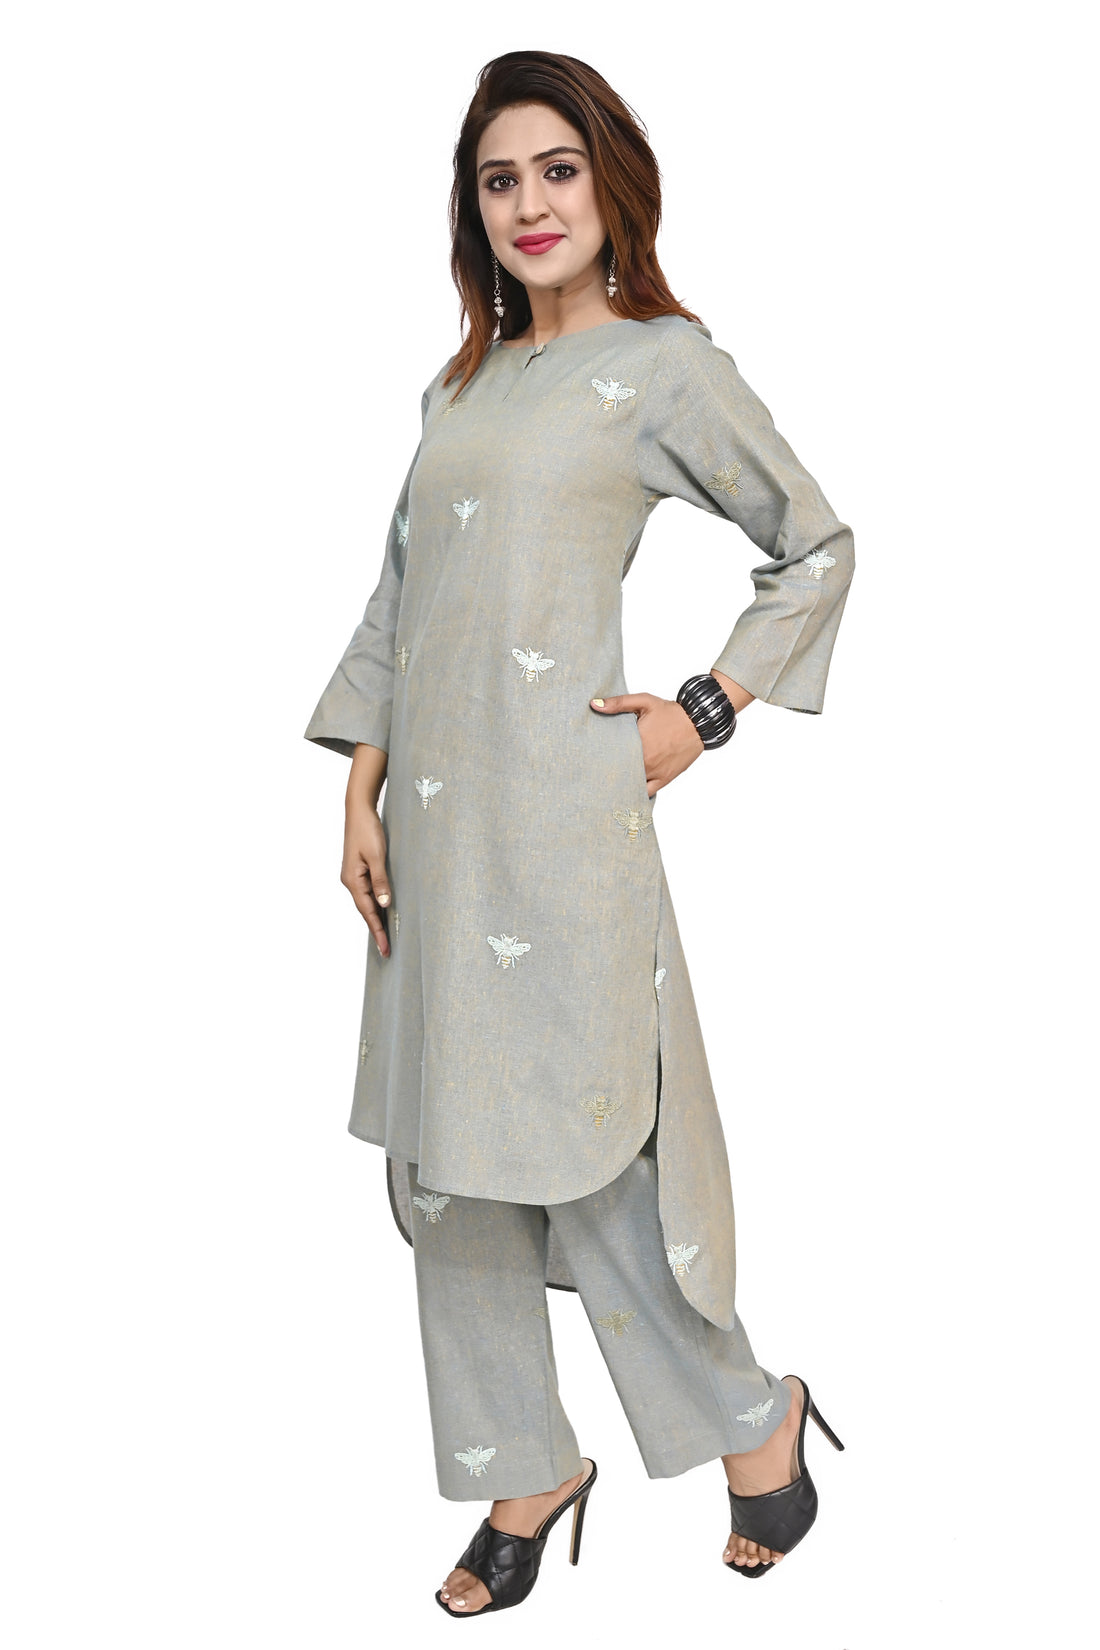 Nirmal online Premium cotton co-ord set kurti for Women in Grey colour with Honey bee embroideryd set